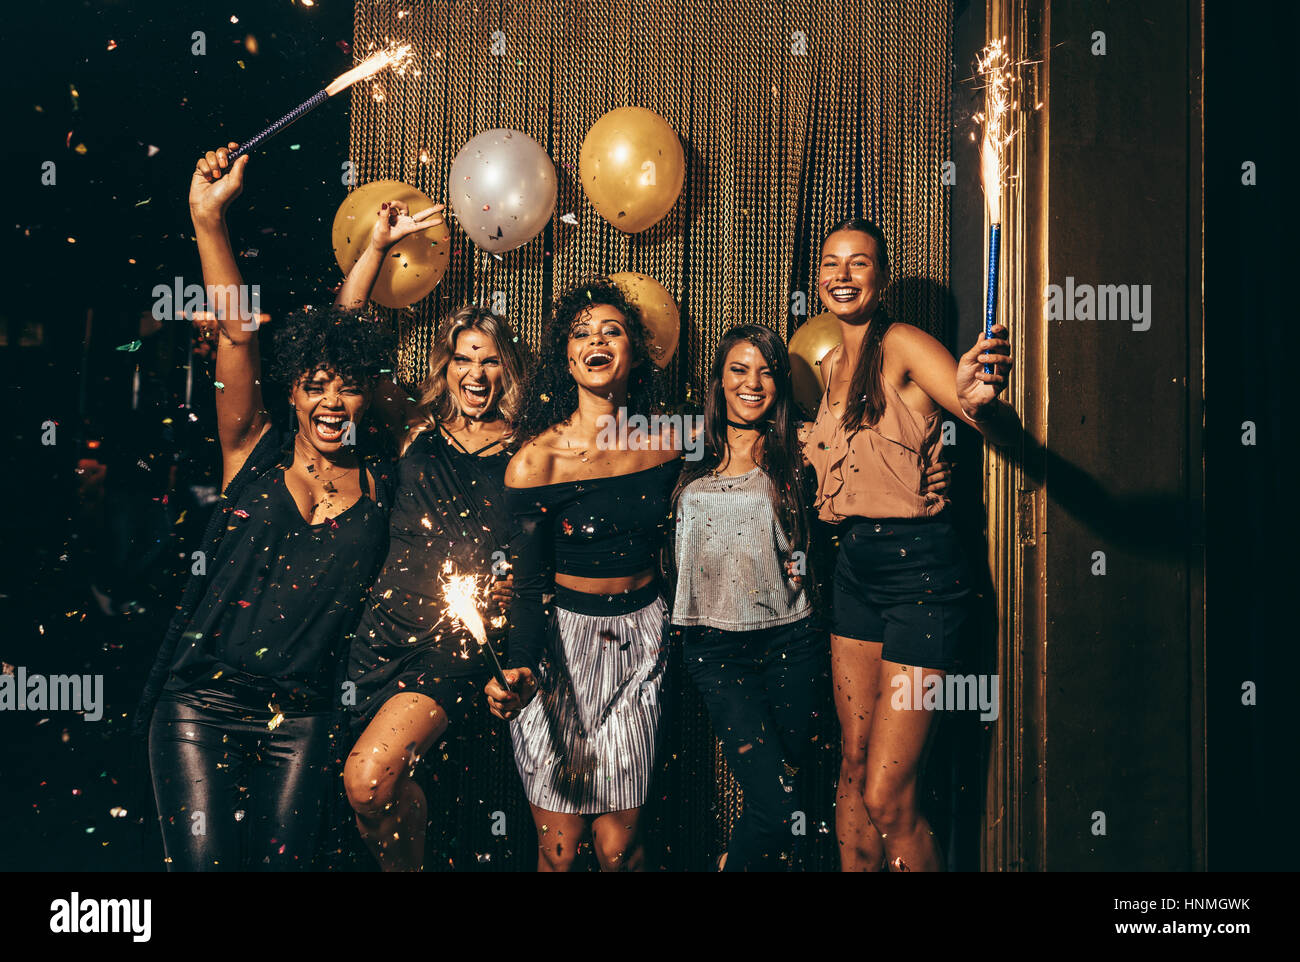 Shot best friends celebrating new year's eve holding sparklers in a party. Group of women having party at nightclub. Stock Photo